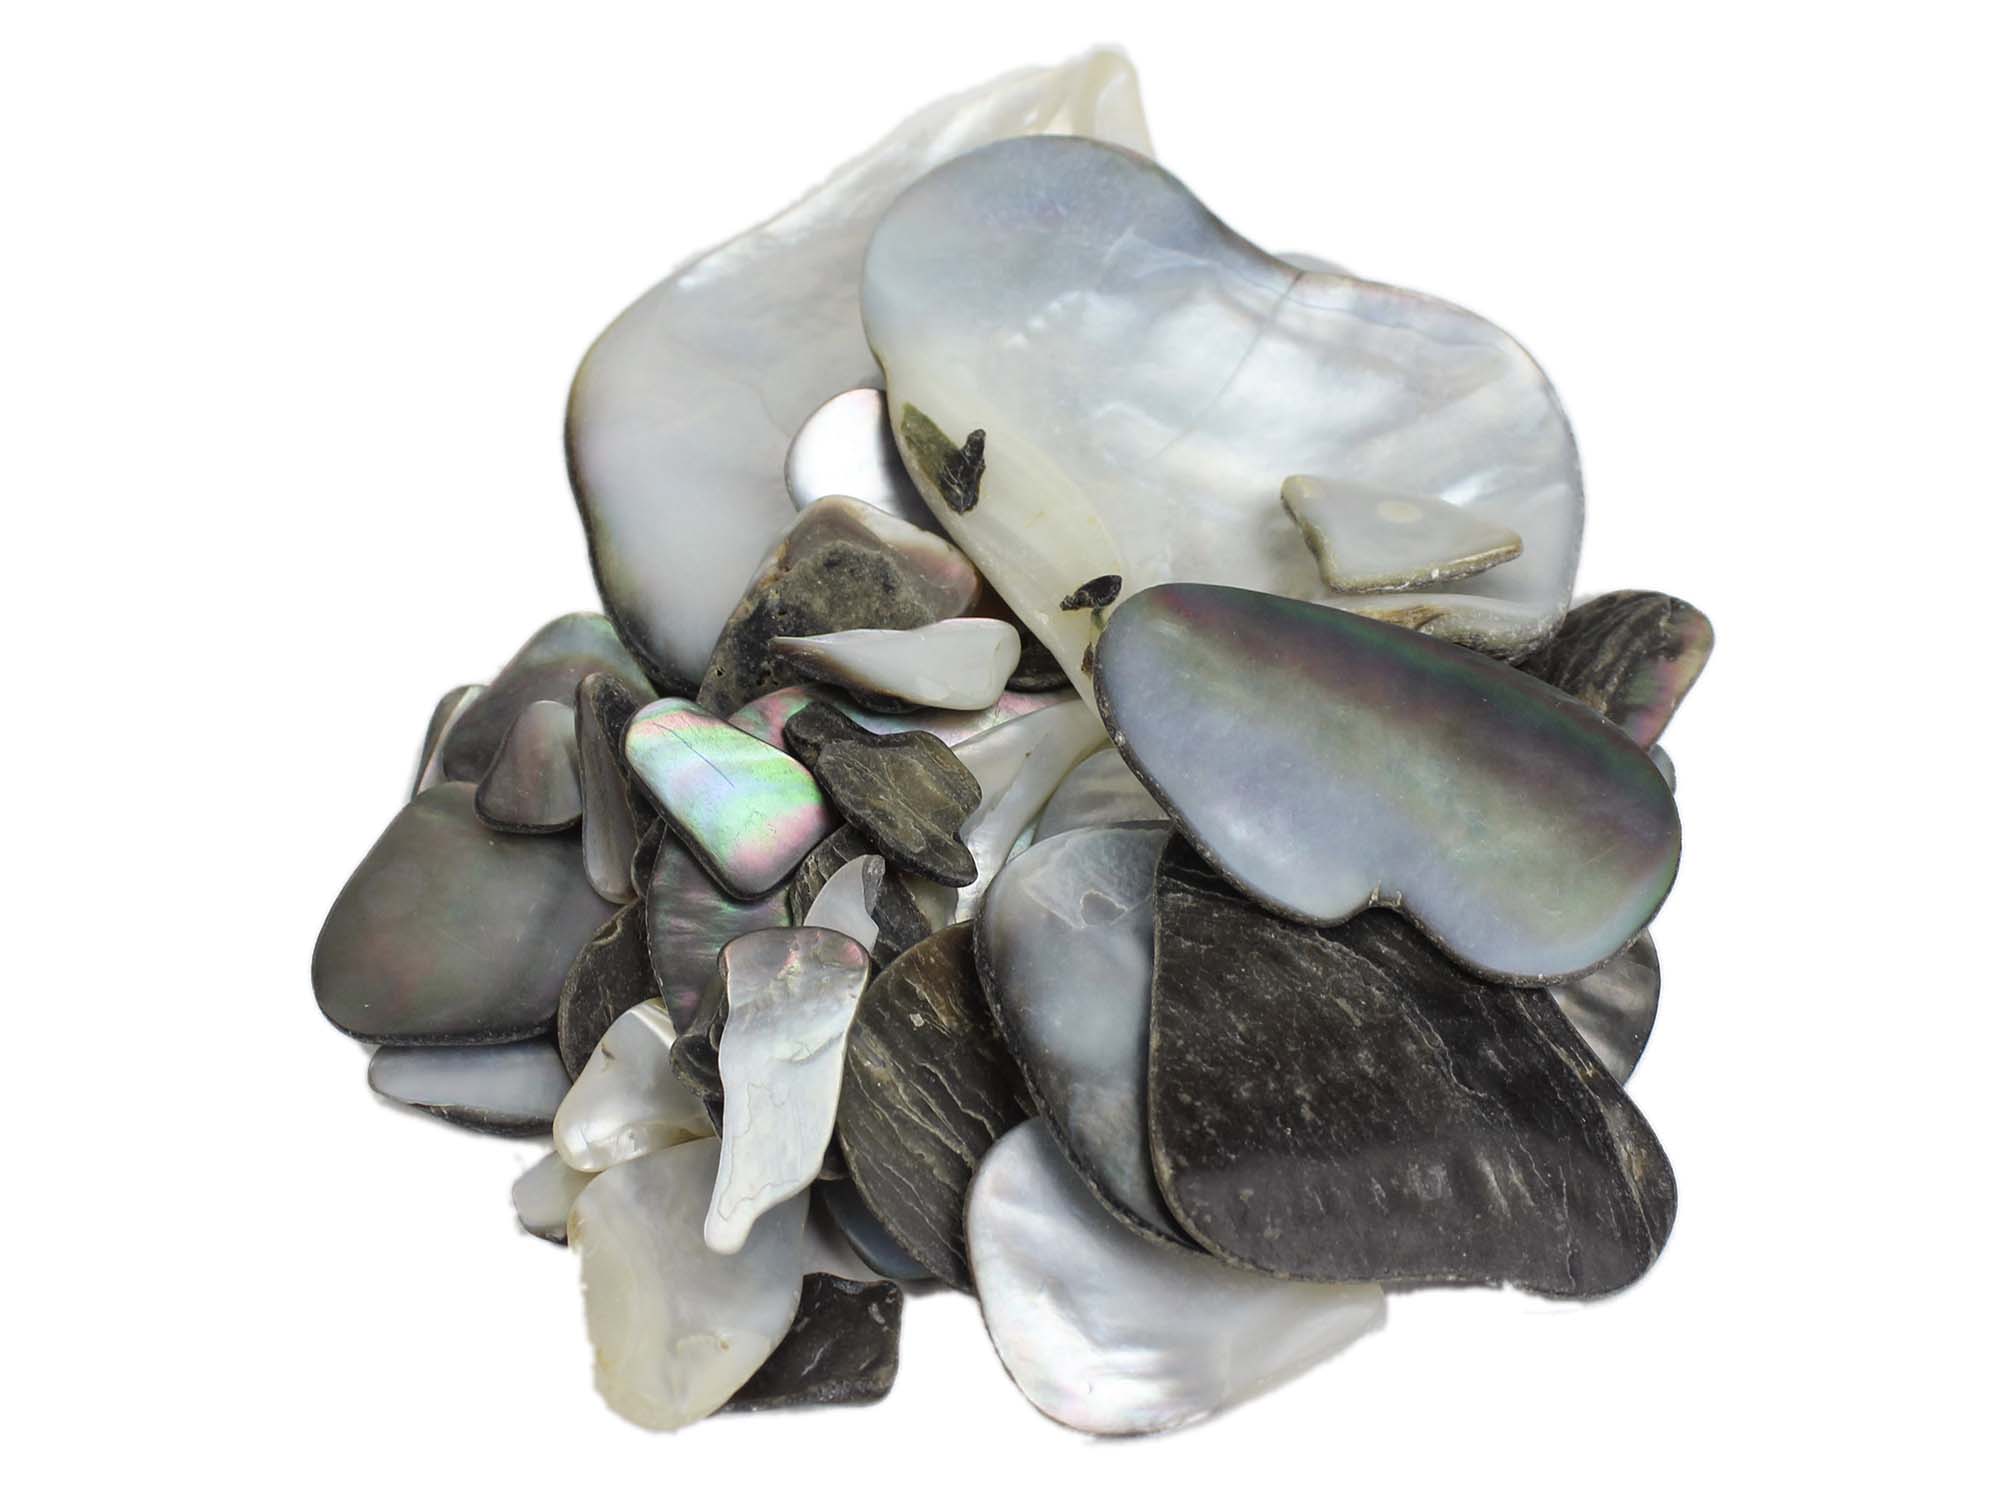 Black Lip Mother of Pearl Shell Pieces: Satin: Unsorted (1/4 lb) 